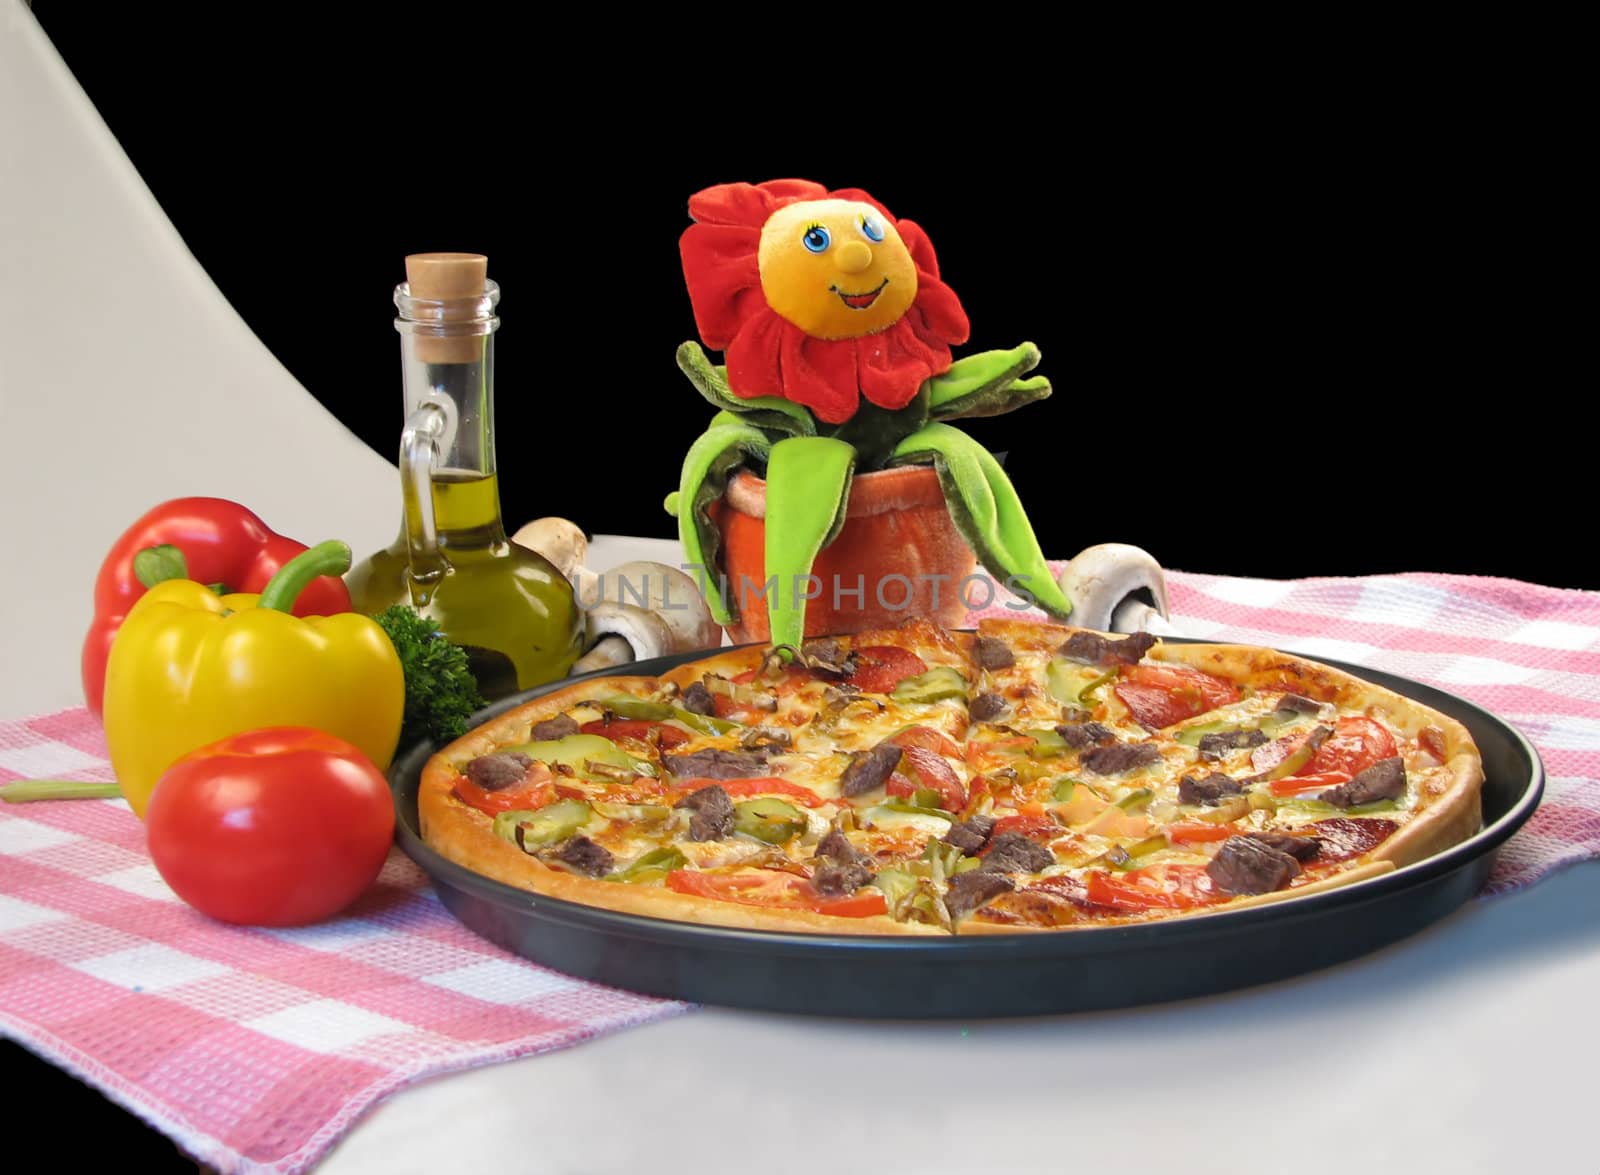 Pizza with a decorative toy